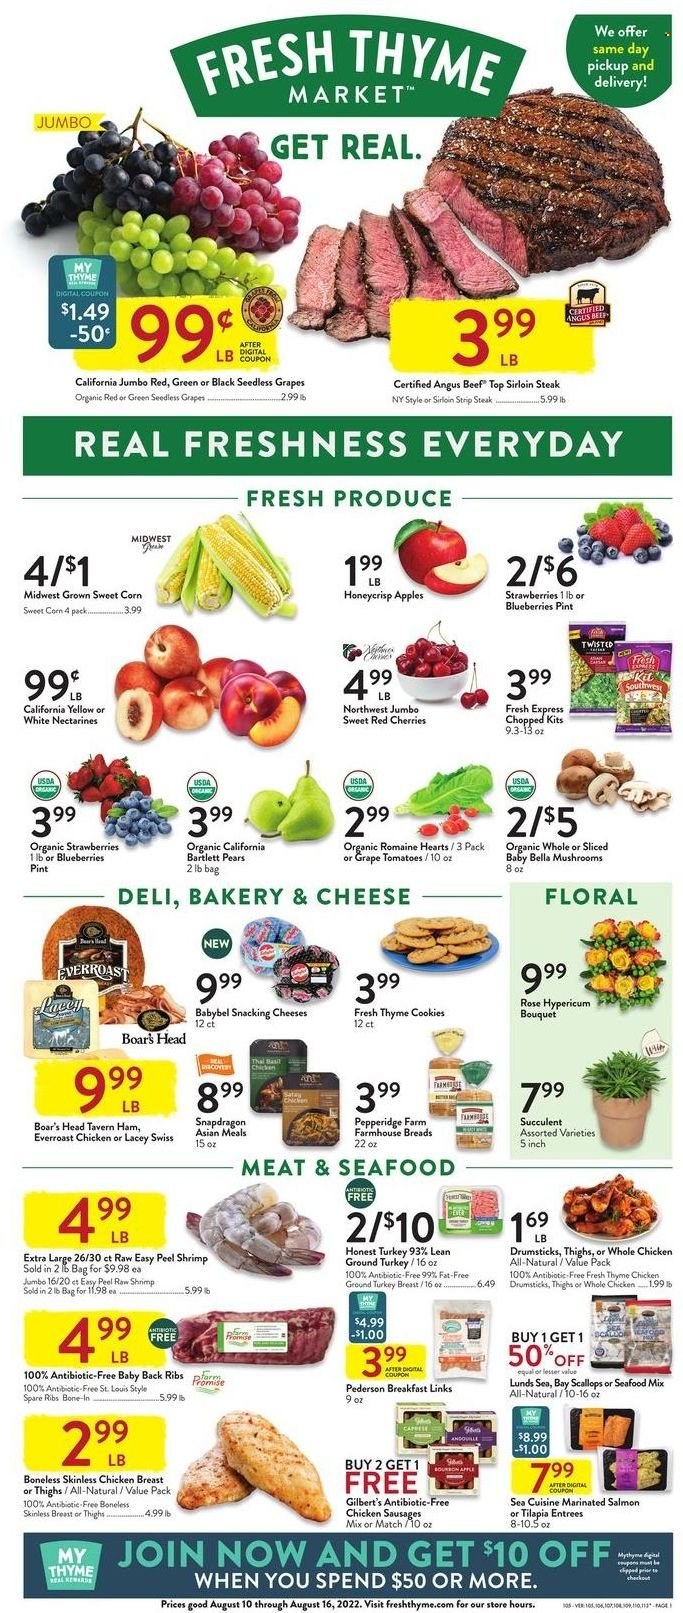 thumbnail - Fresh Thyme Flyer - 08/10/2022 - 08/16/2022 - Sales products - mushrooms, corn, tomatoes, sweet corn, apples, Bartlett pears, blueberries, seedless grapes, strawberries, pears, salmon, scallops, tilapia, seafood, shrimps, ham, sausage, Gilbert’s, Babybel, cookies, wine, rosé wine, ground turkey, turkey breast, whole chicken, chicken breasts, chicken drumsticks, beef meat, beef sirloin, steak, sirloin steak, striploin steak, pork meat, pork ribs, pork spare ribs, pork back ribs, bouquet, succulent, rose, nectarines. Page 1.